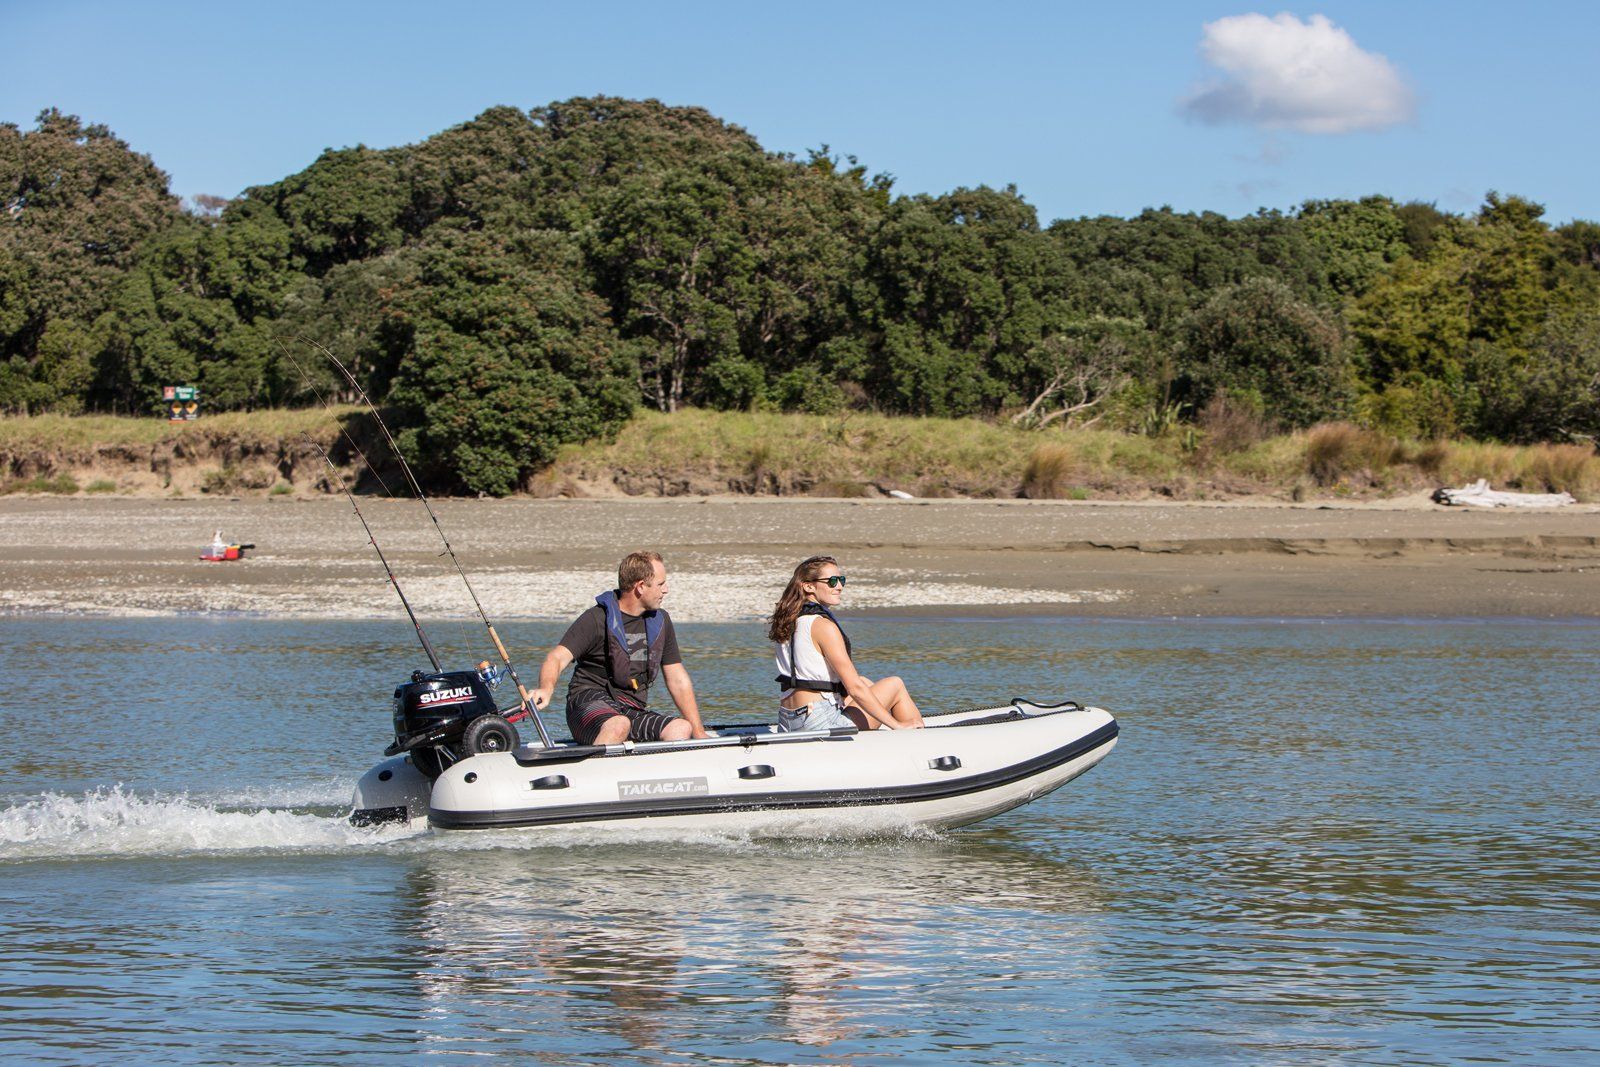 The catamaran inflatable boats are light, robust and glide very well even with small engines